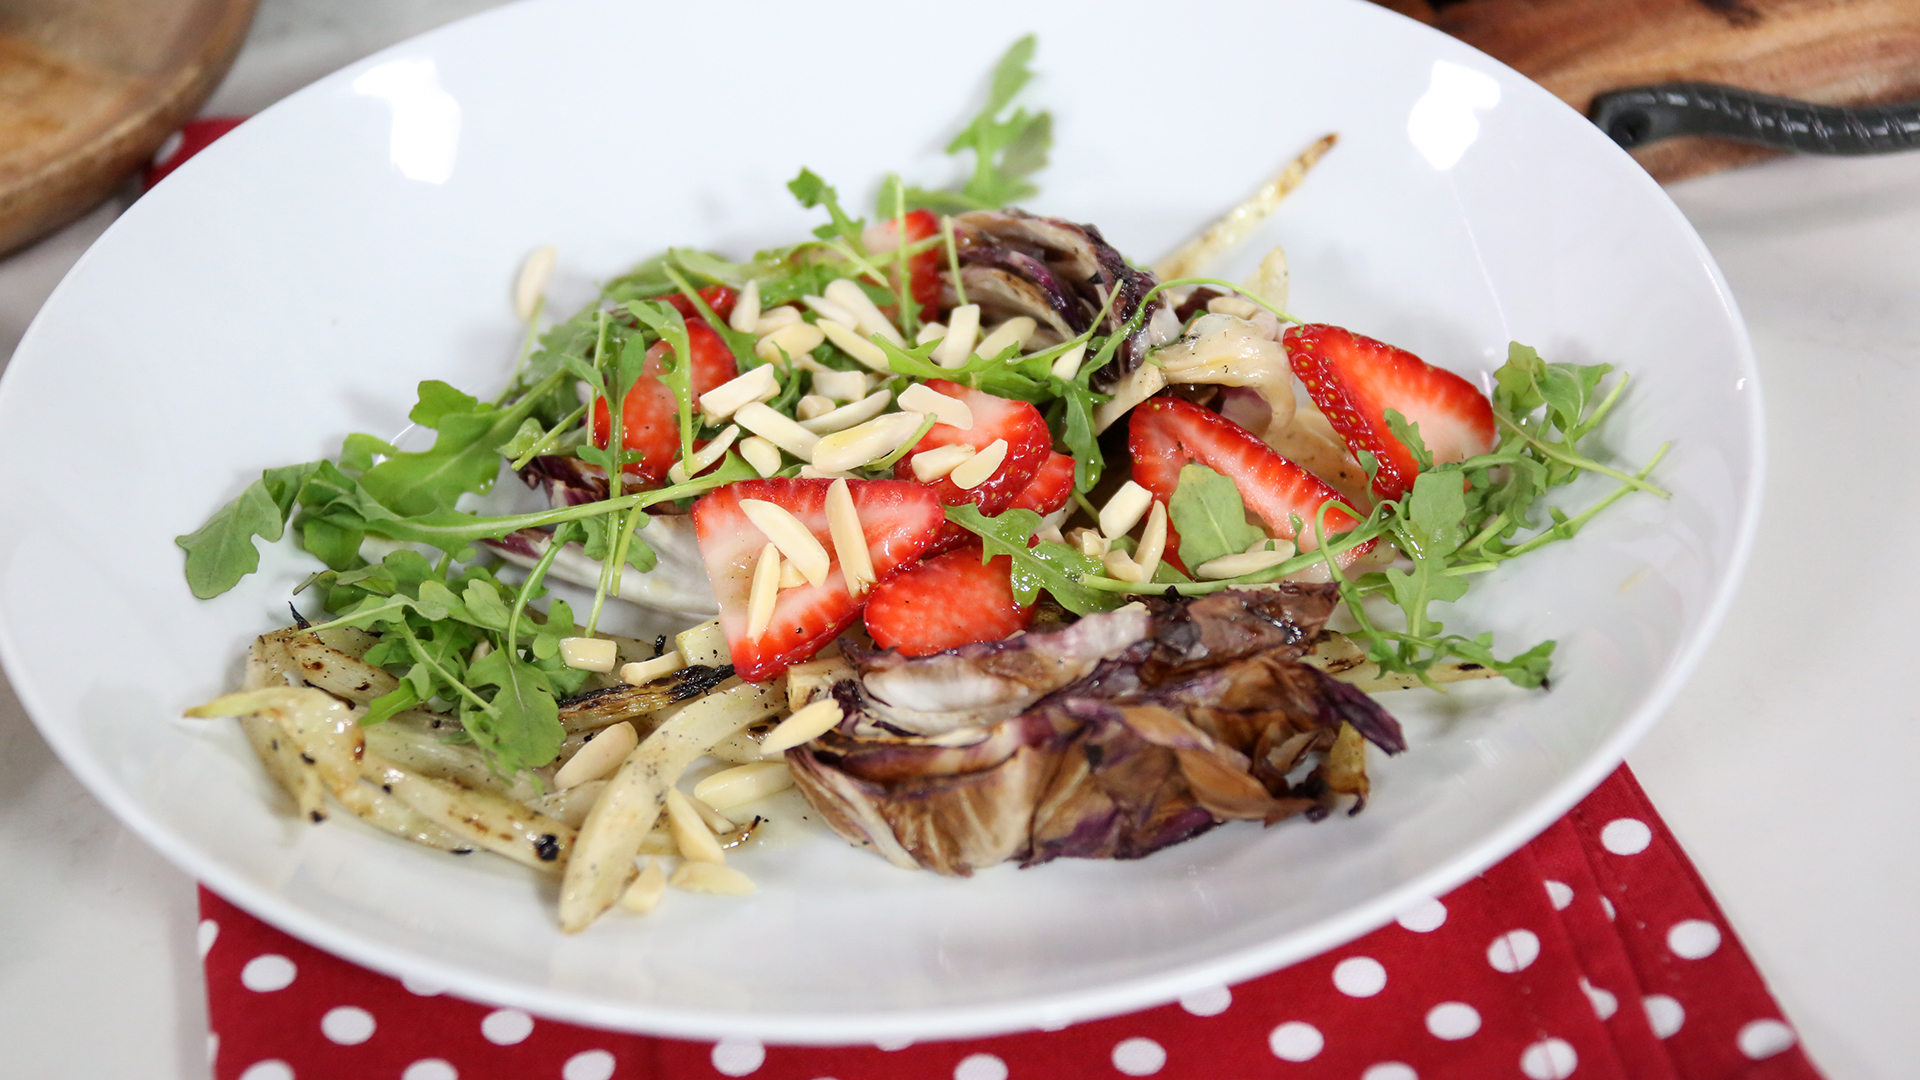 Grilled radicchio and fennel salad with strawberry and almond